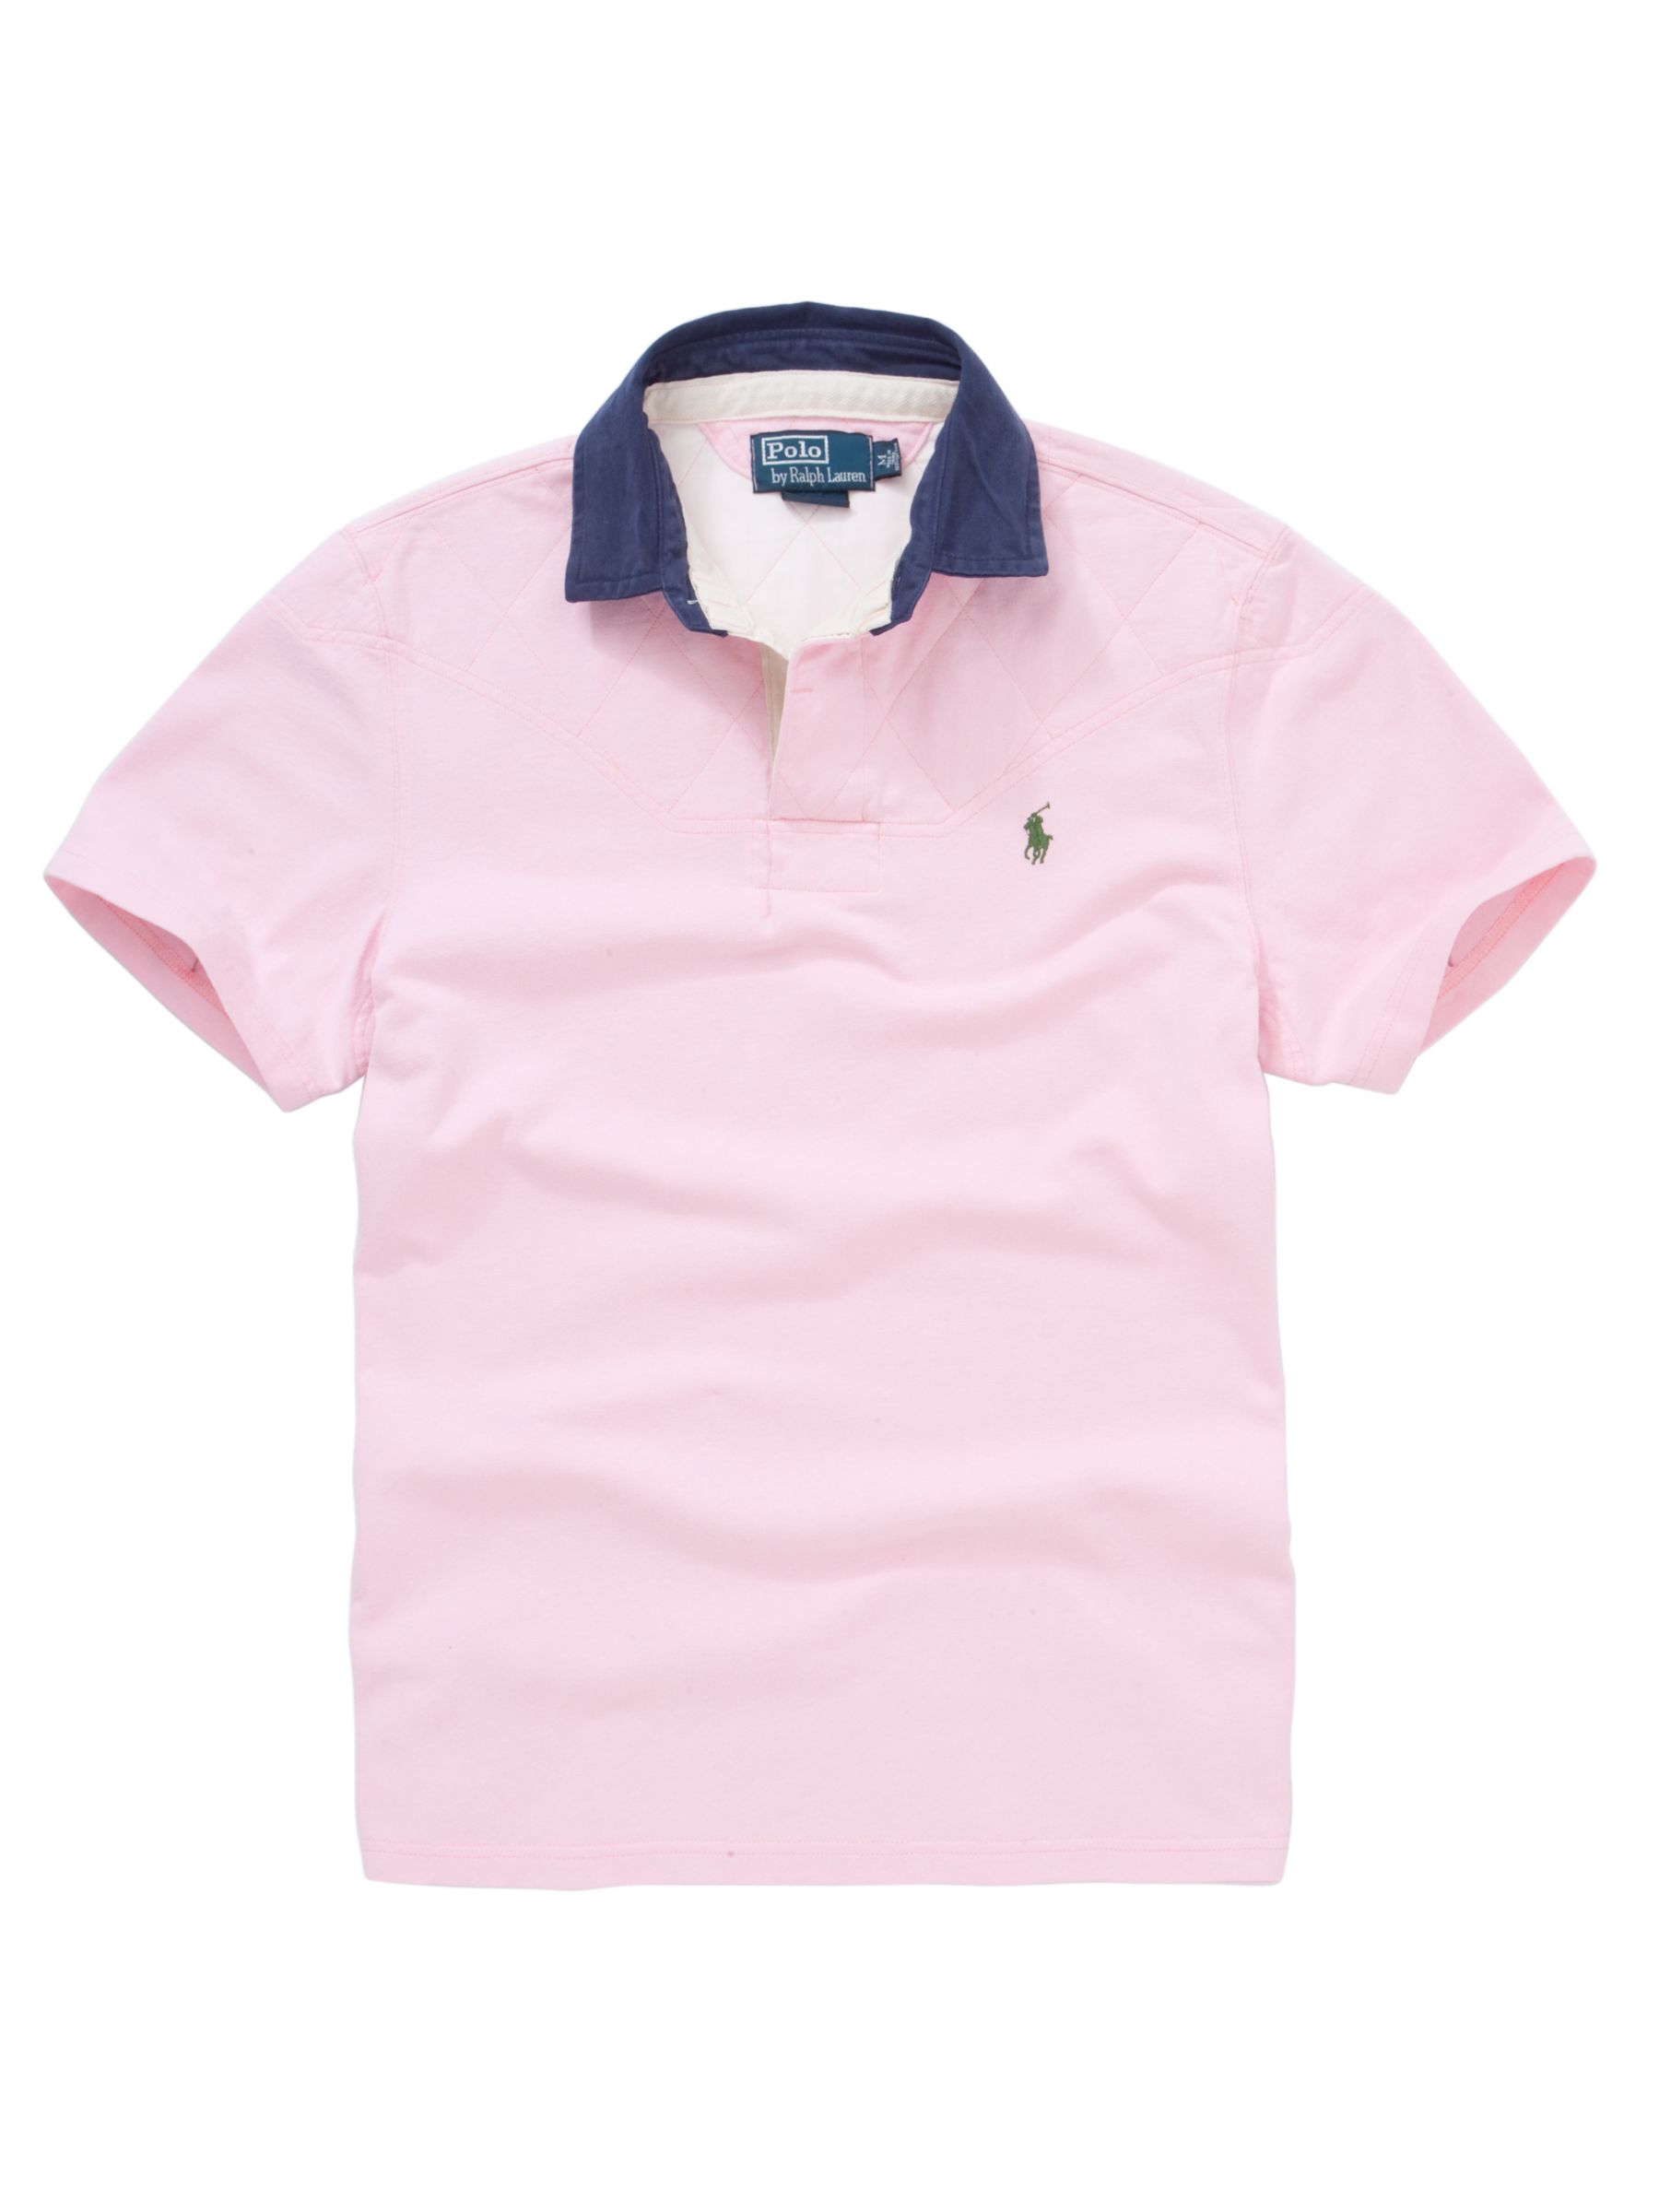 Polo Ralph Lauren Quilted Rugby Shirt, Carmel Pink